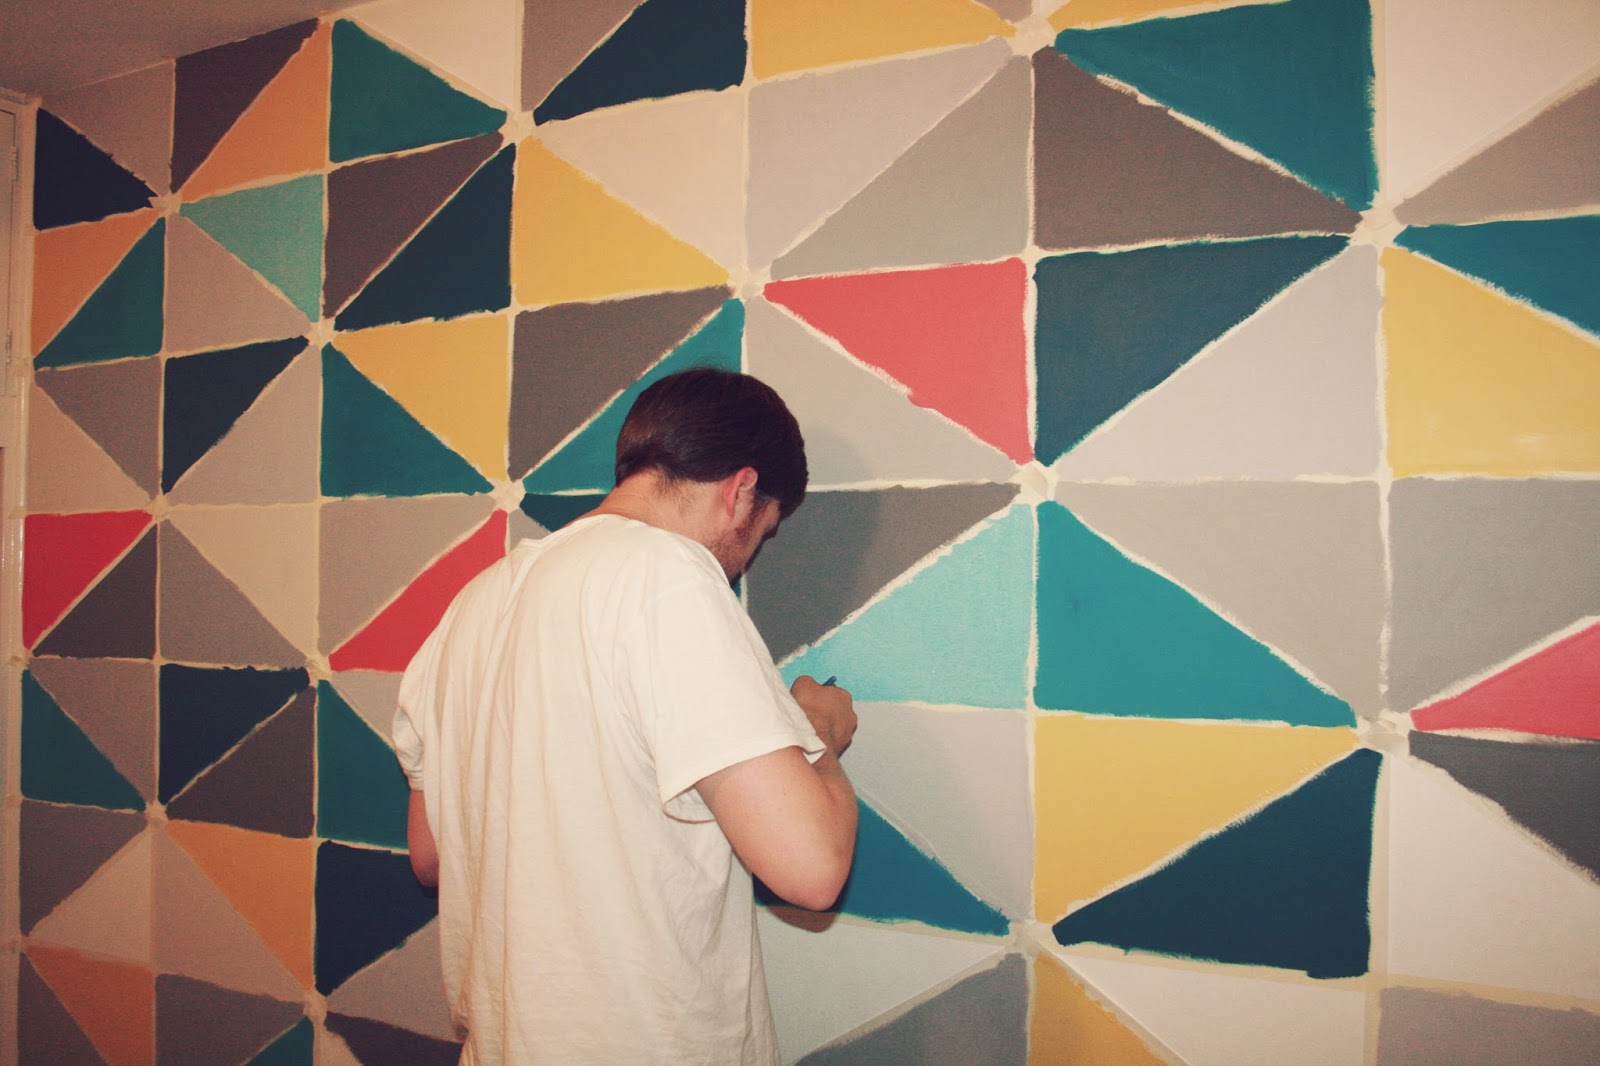 Katie Jessica : DIY Home: Triangle feature wall